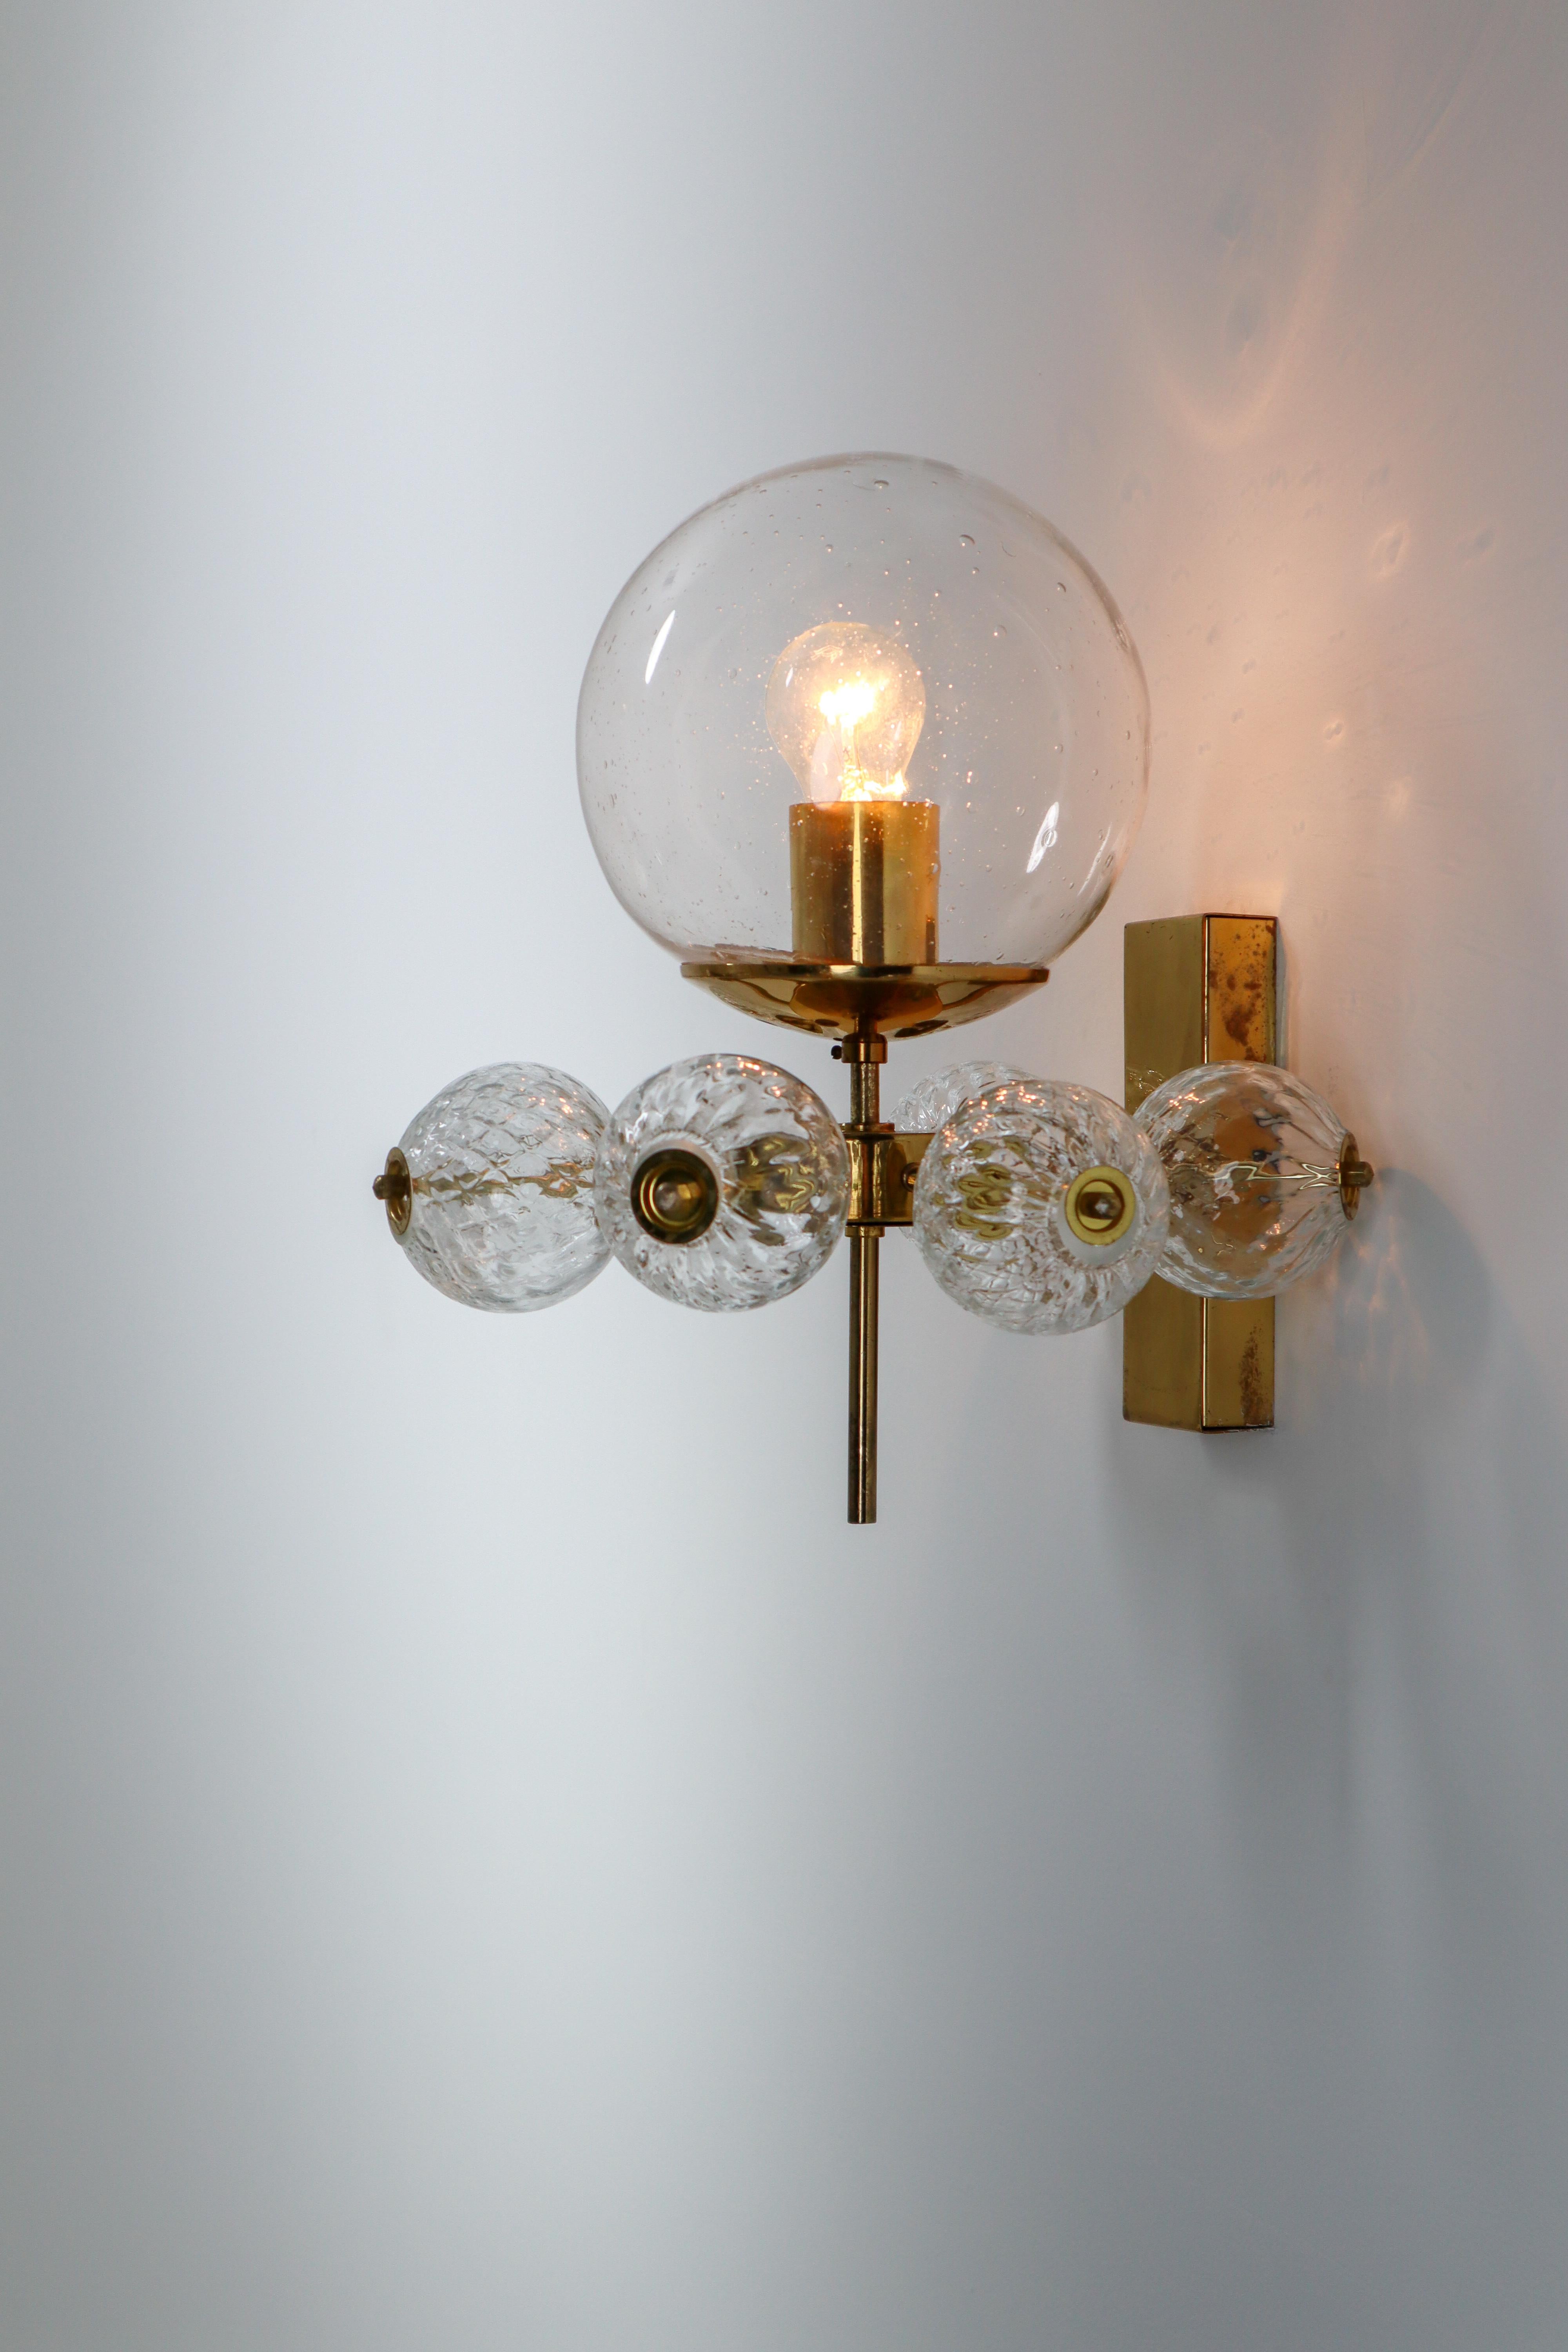 Hotel Wall Chandeliers with Brass Fixture, European, 1970s For Sale 4